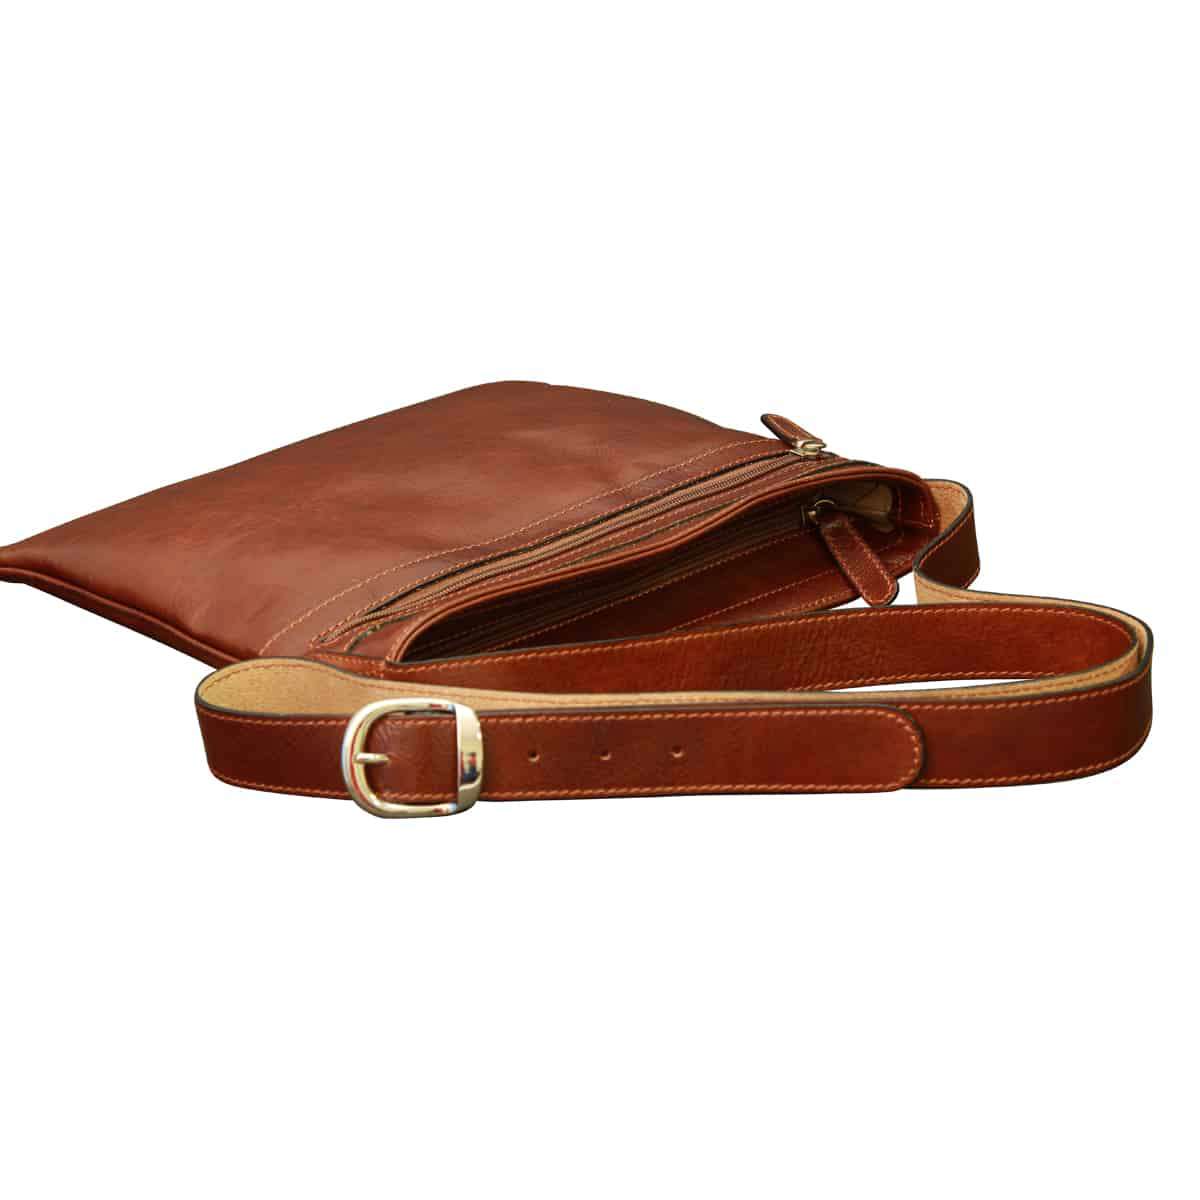 Leather Cross Body Bag - Brown | 069705MA | EURO | Old Angler Firenze